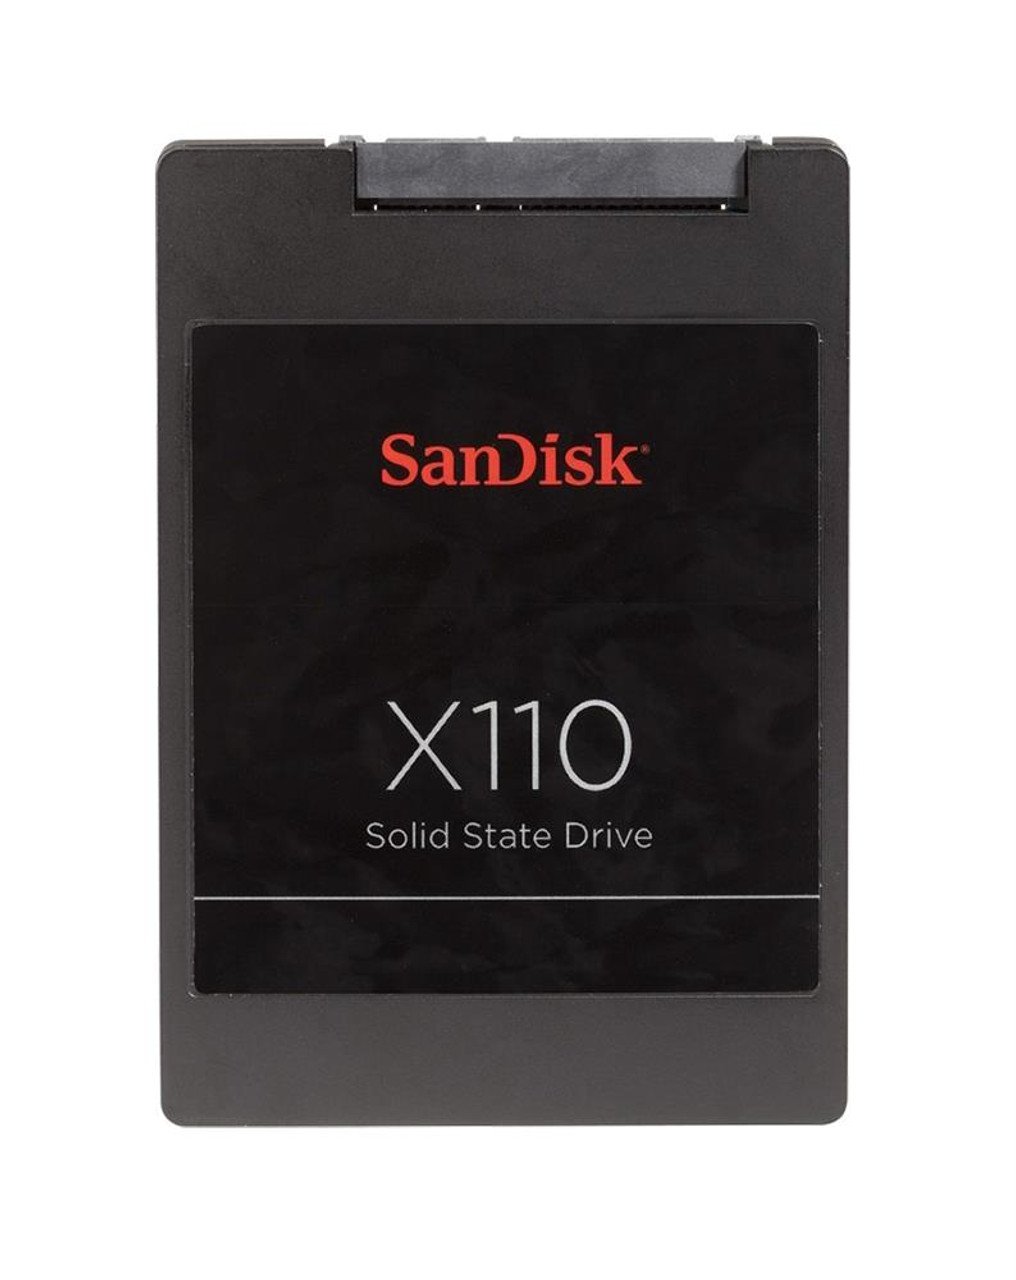 SD6SB1M-128G-1022I-A SanDisk X110 128GB MLC SATA 6Gbps 2.5-inch Internal Solid State Drive (SSD)